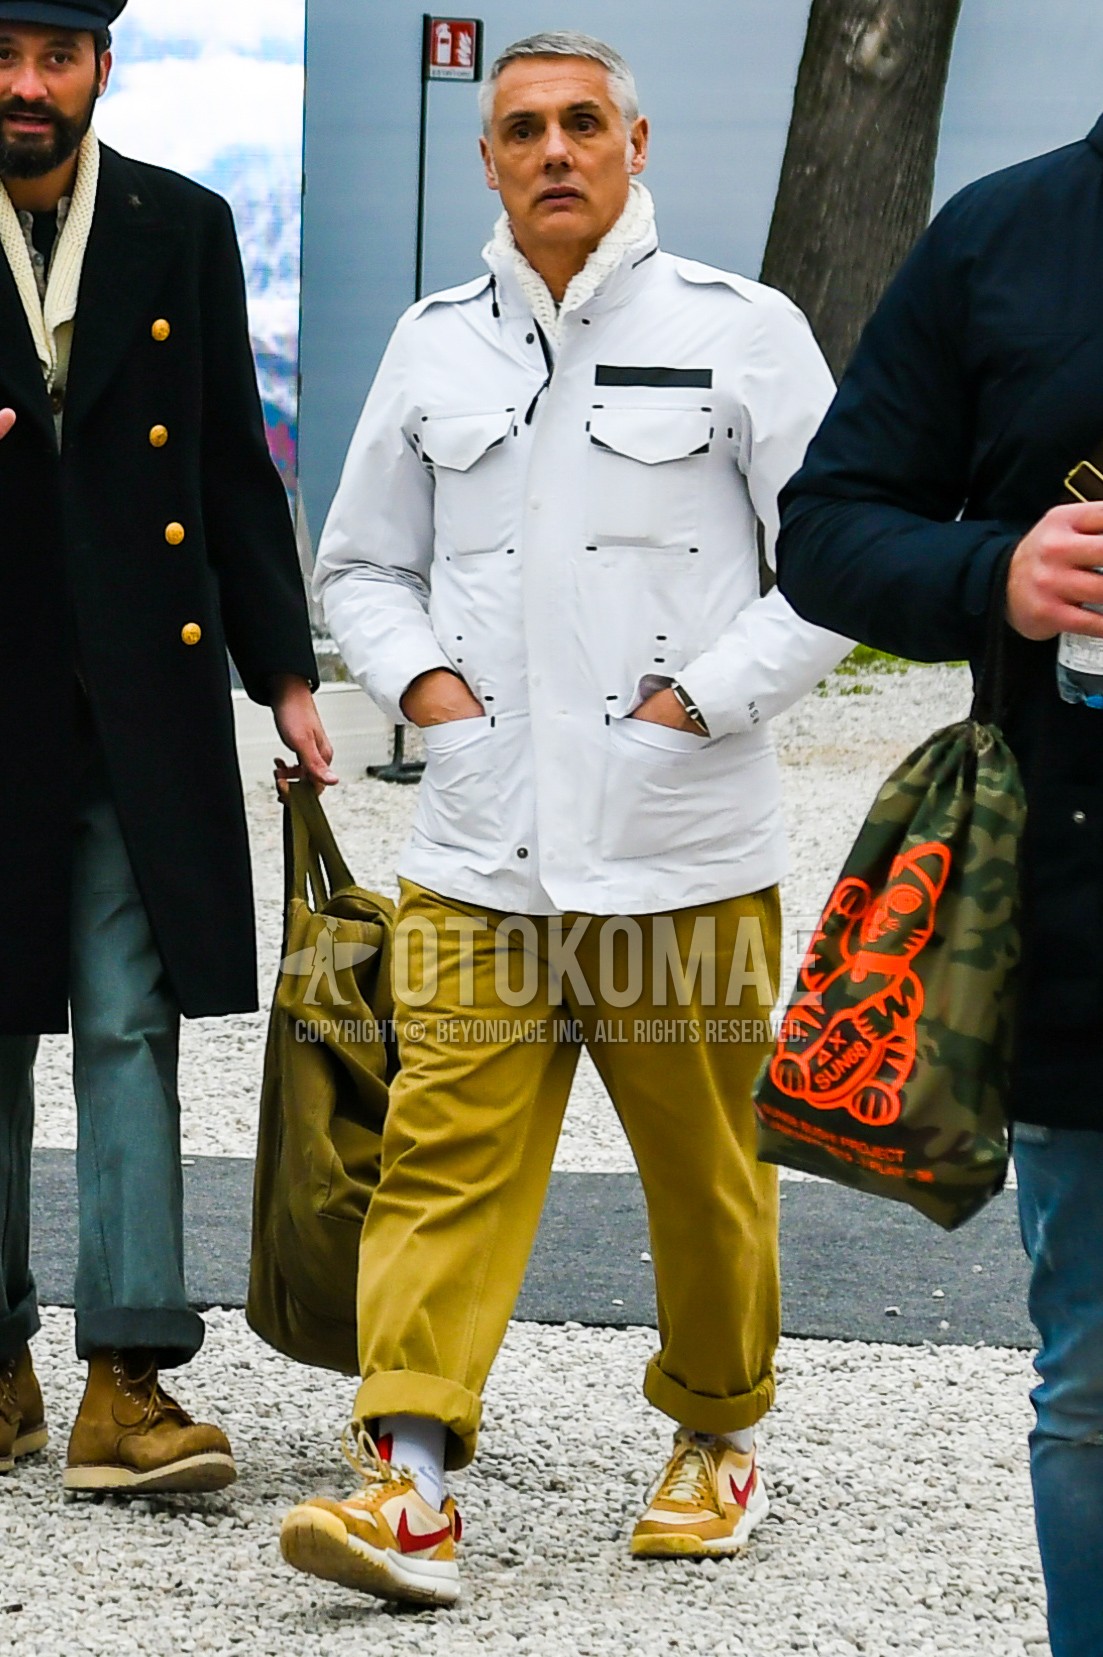 Men's autumn winter outfit with white plain M-65, beige plain chinos, white plain socks, beige low-cut sneakers.